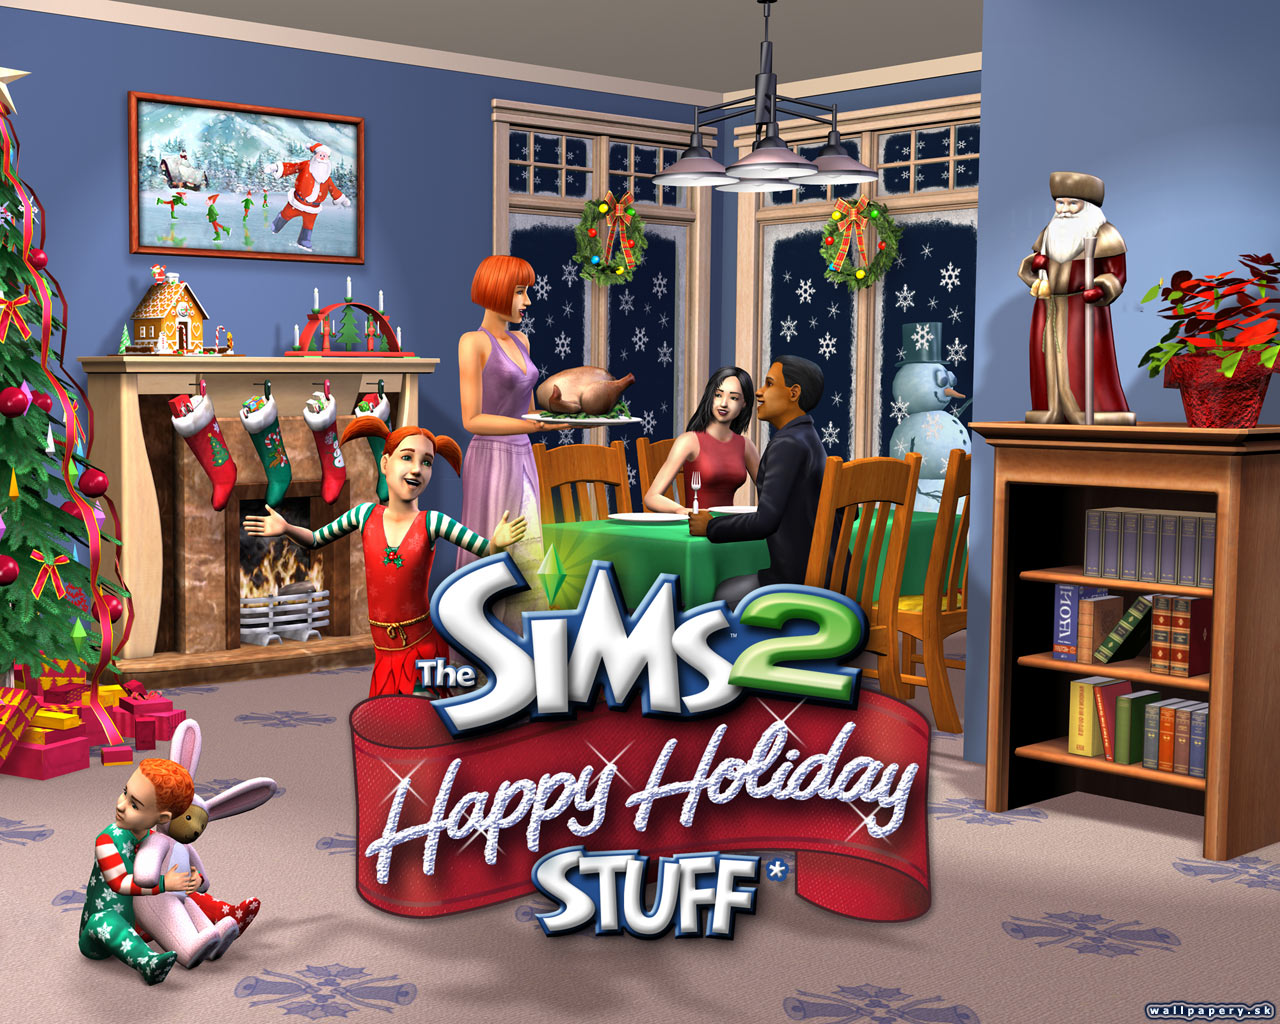 The Sims 2: Happy Holiday Stuff - wallpaper 3